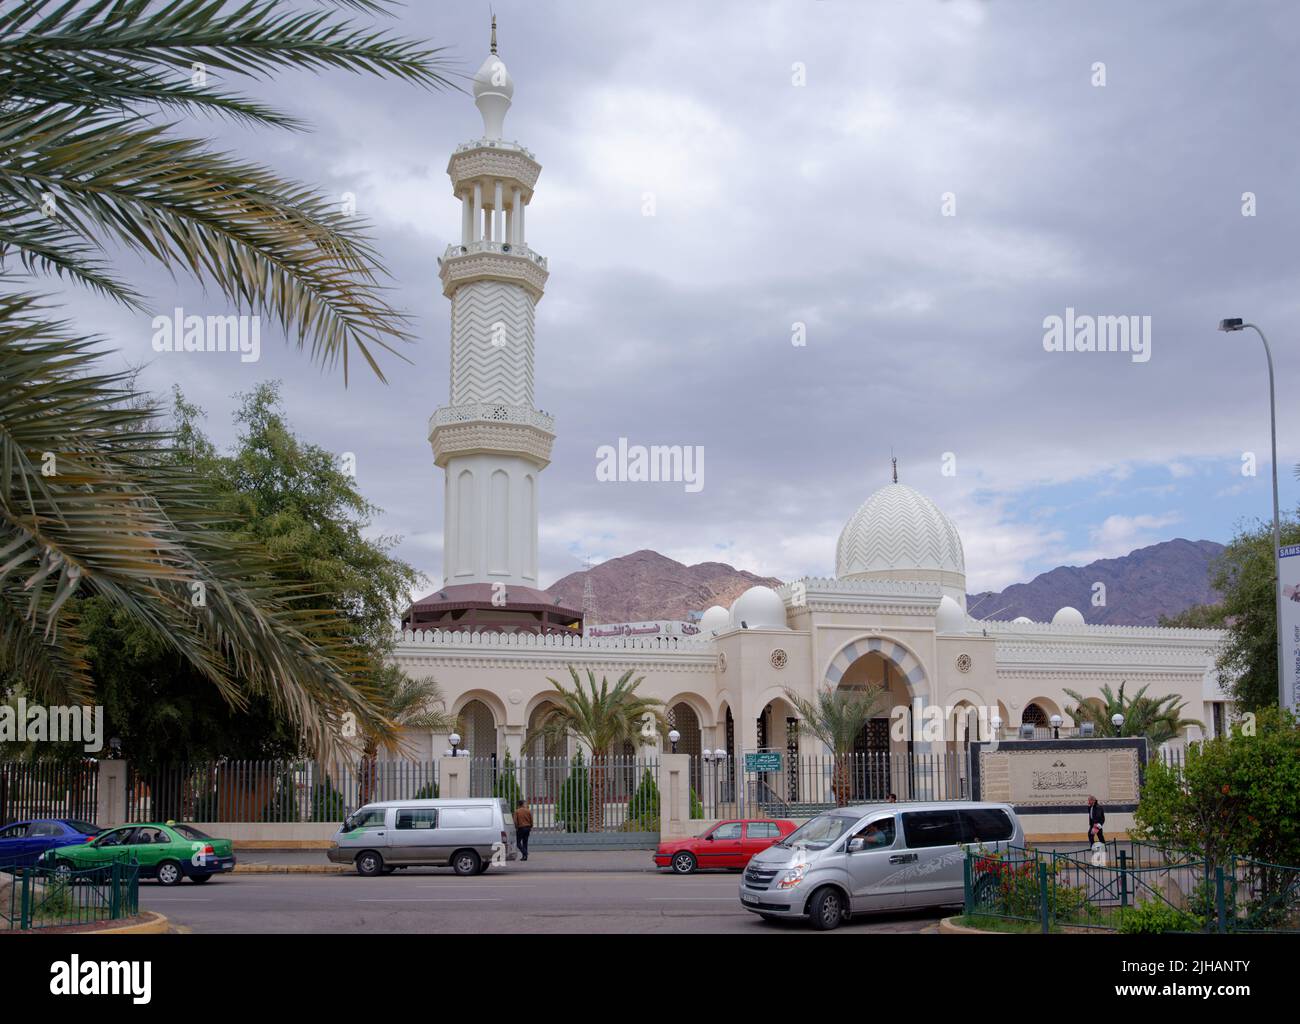 Al Sharif Hussein Bin Ali mosque in Aqaba, Jordan. Built in 1975, the mosque was renovated and enlarged in 2011 Stock Photo